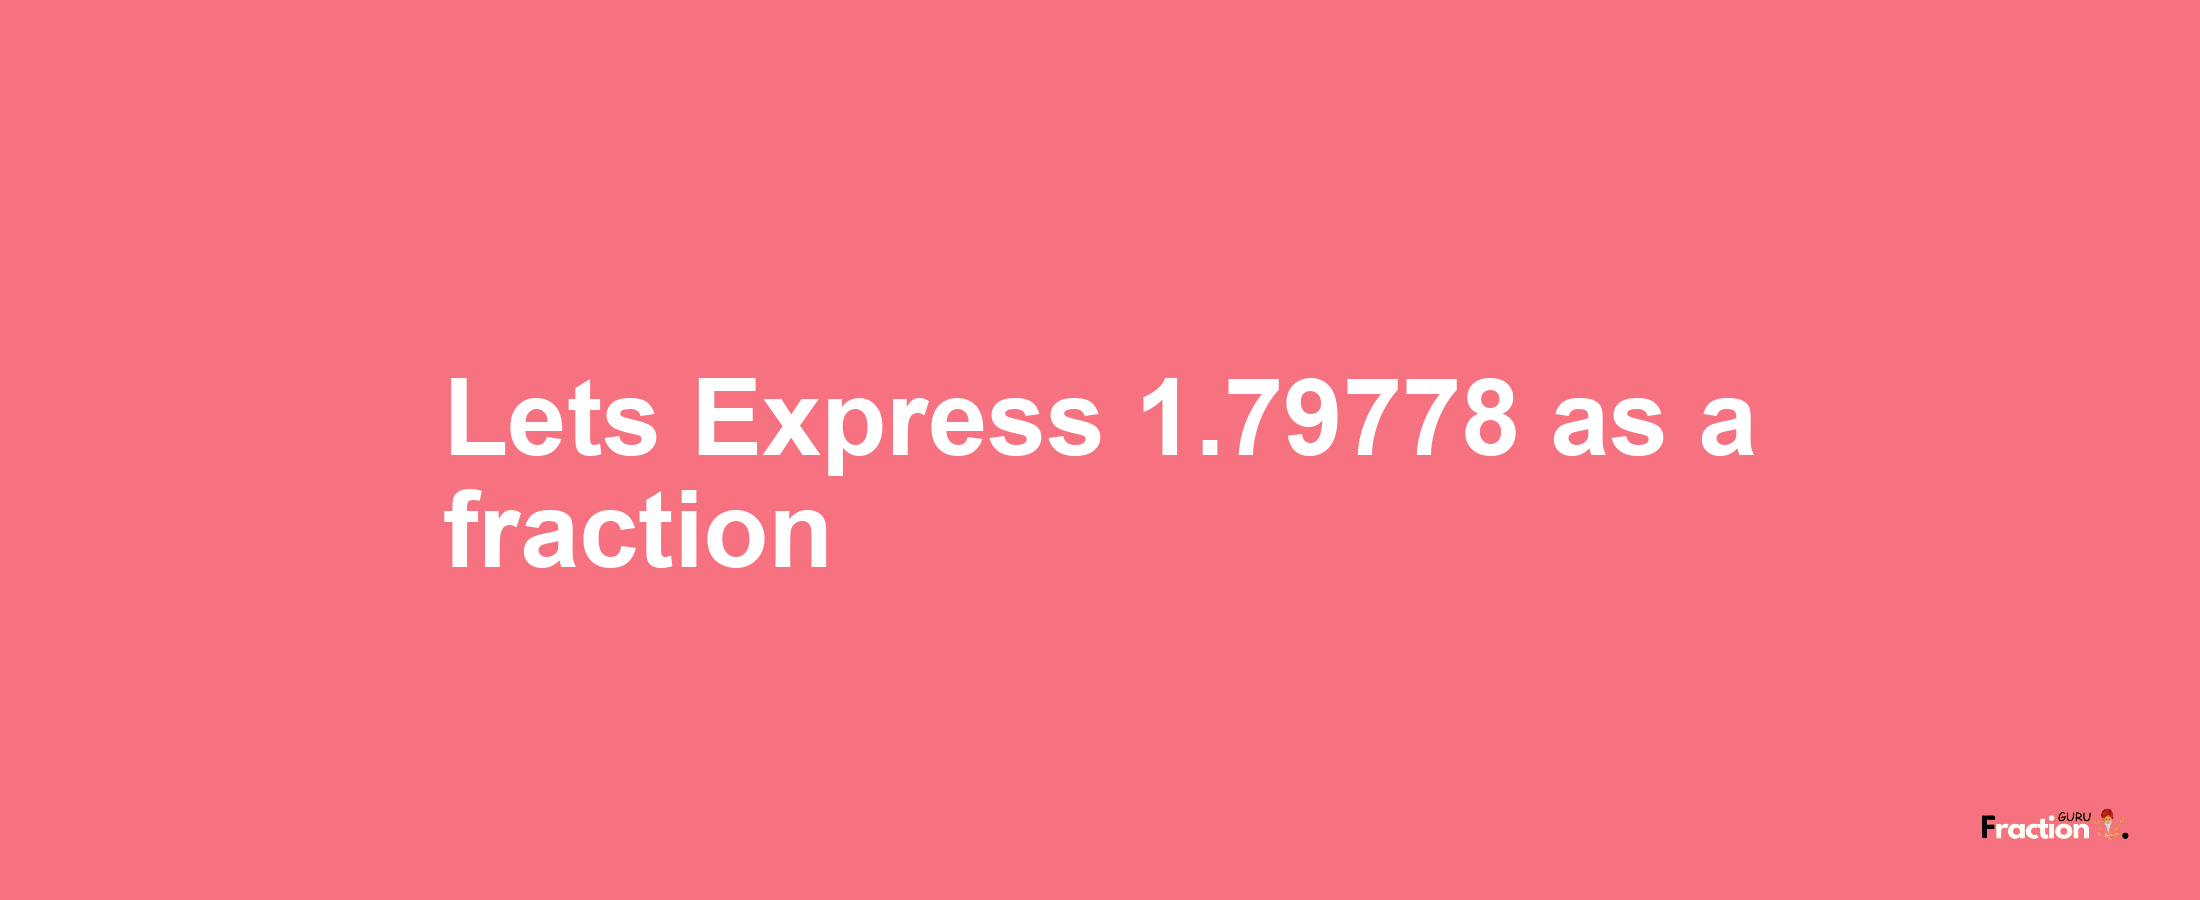 Lets Express 1.79778 as afraction